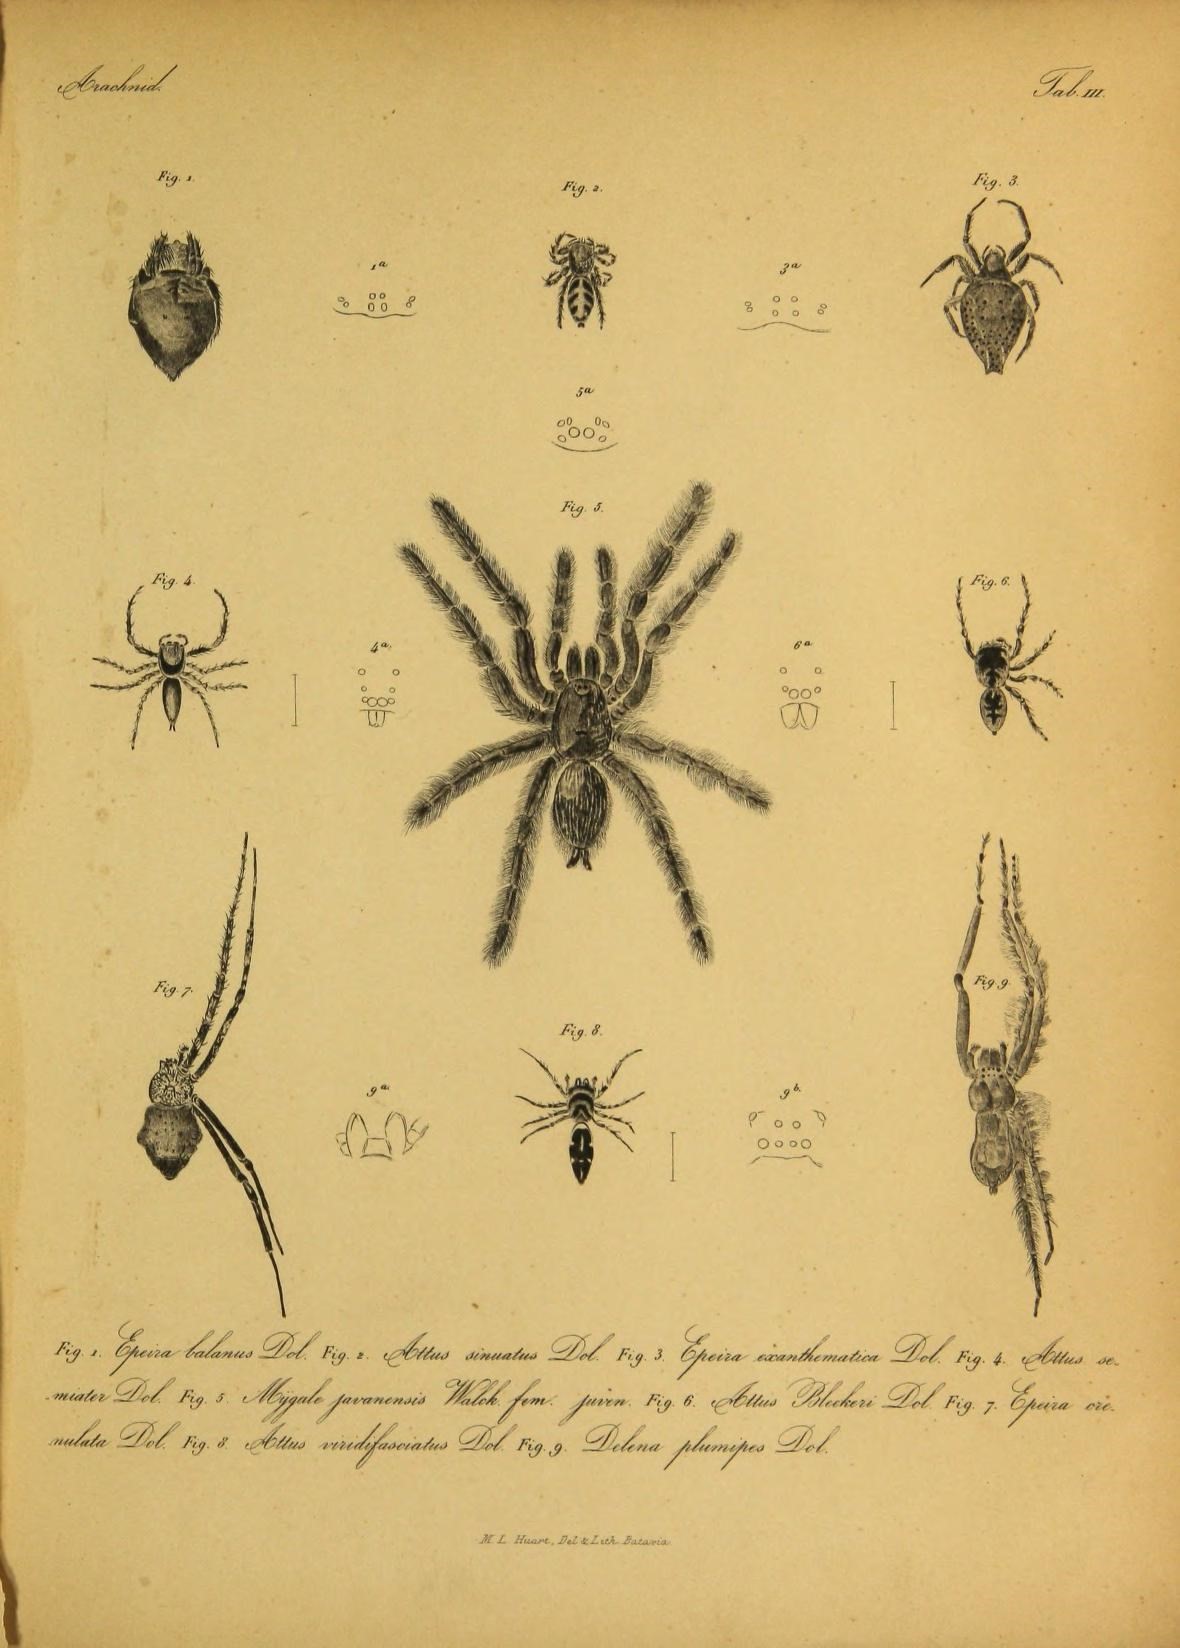 a bunch of black spider's are shown